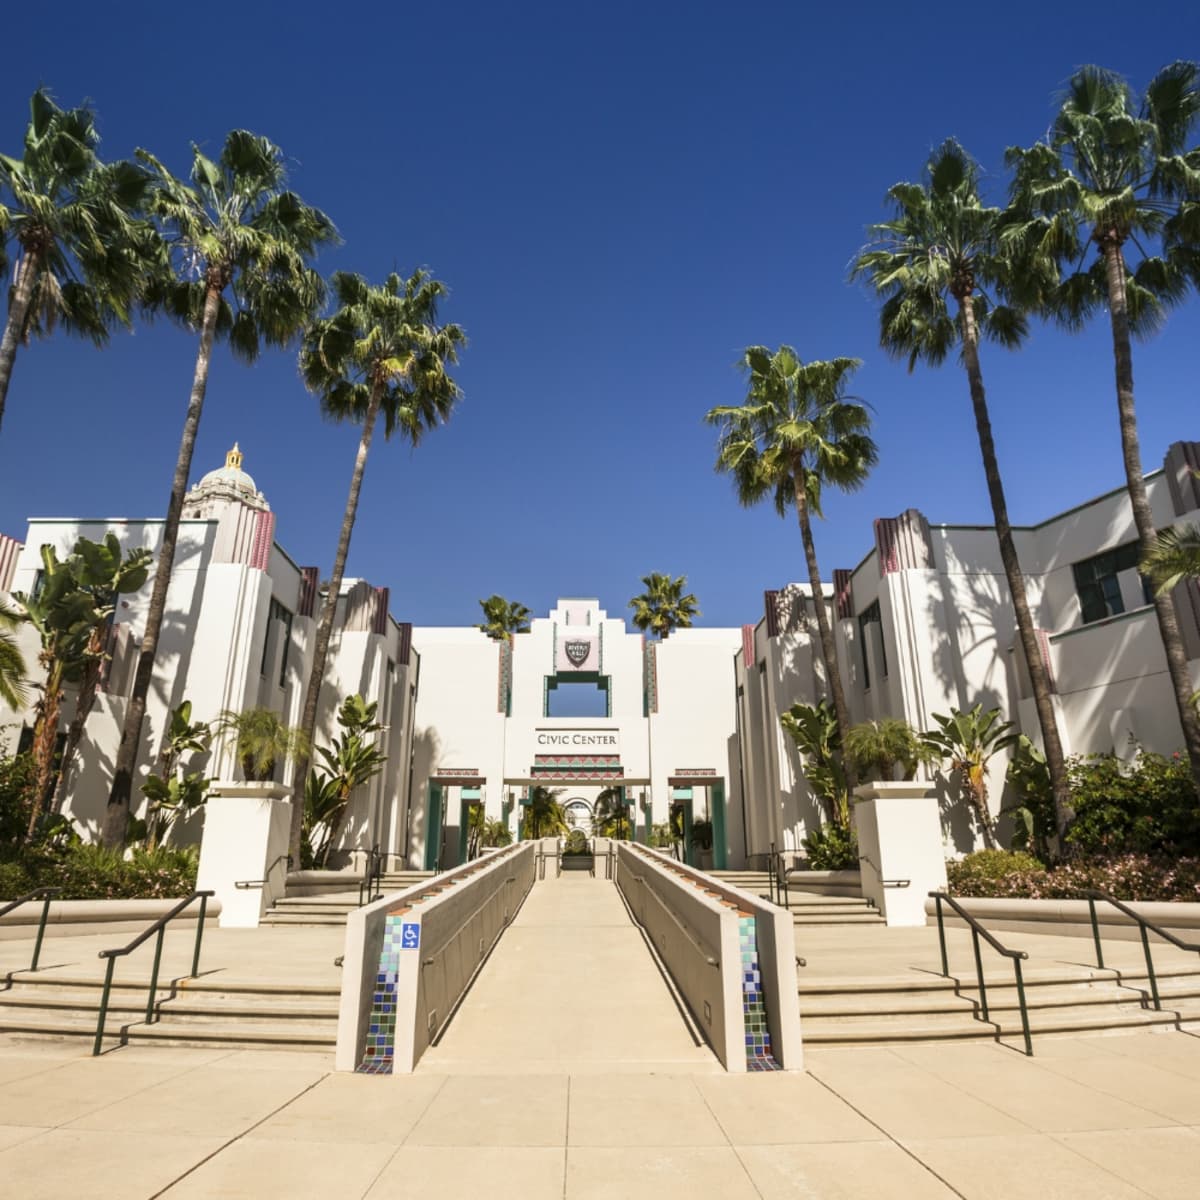 Beverly Hills City Hall and Civic Center